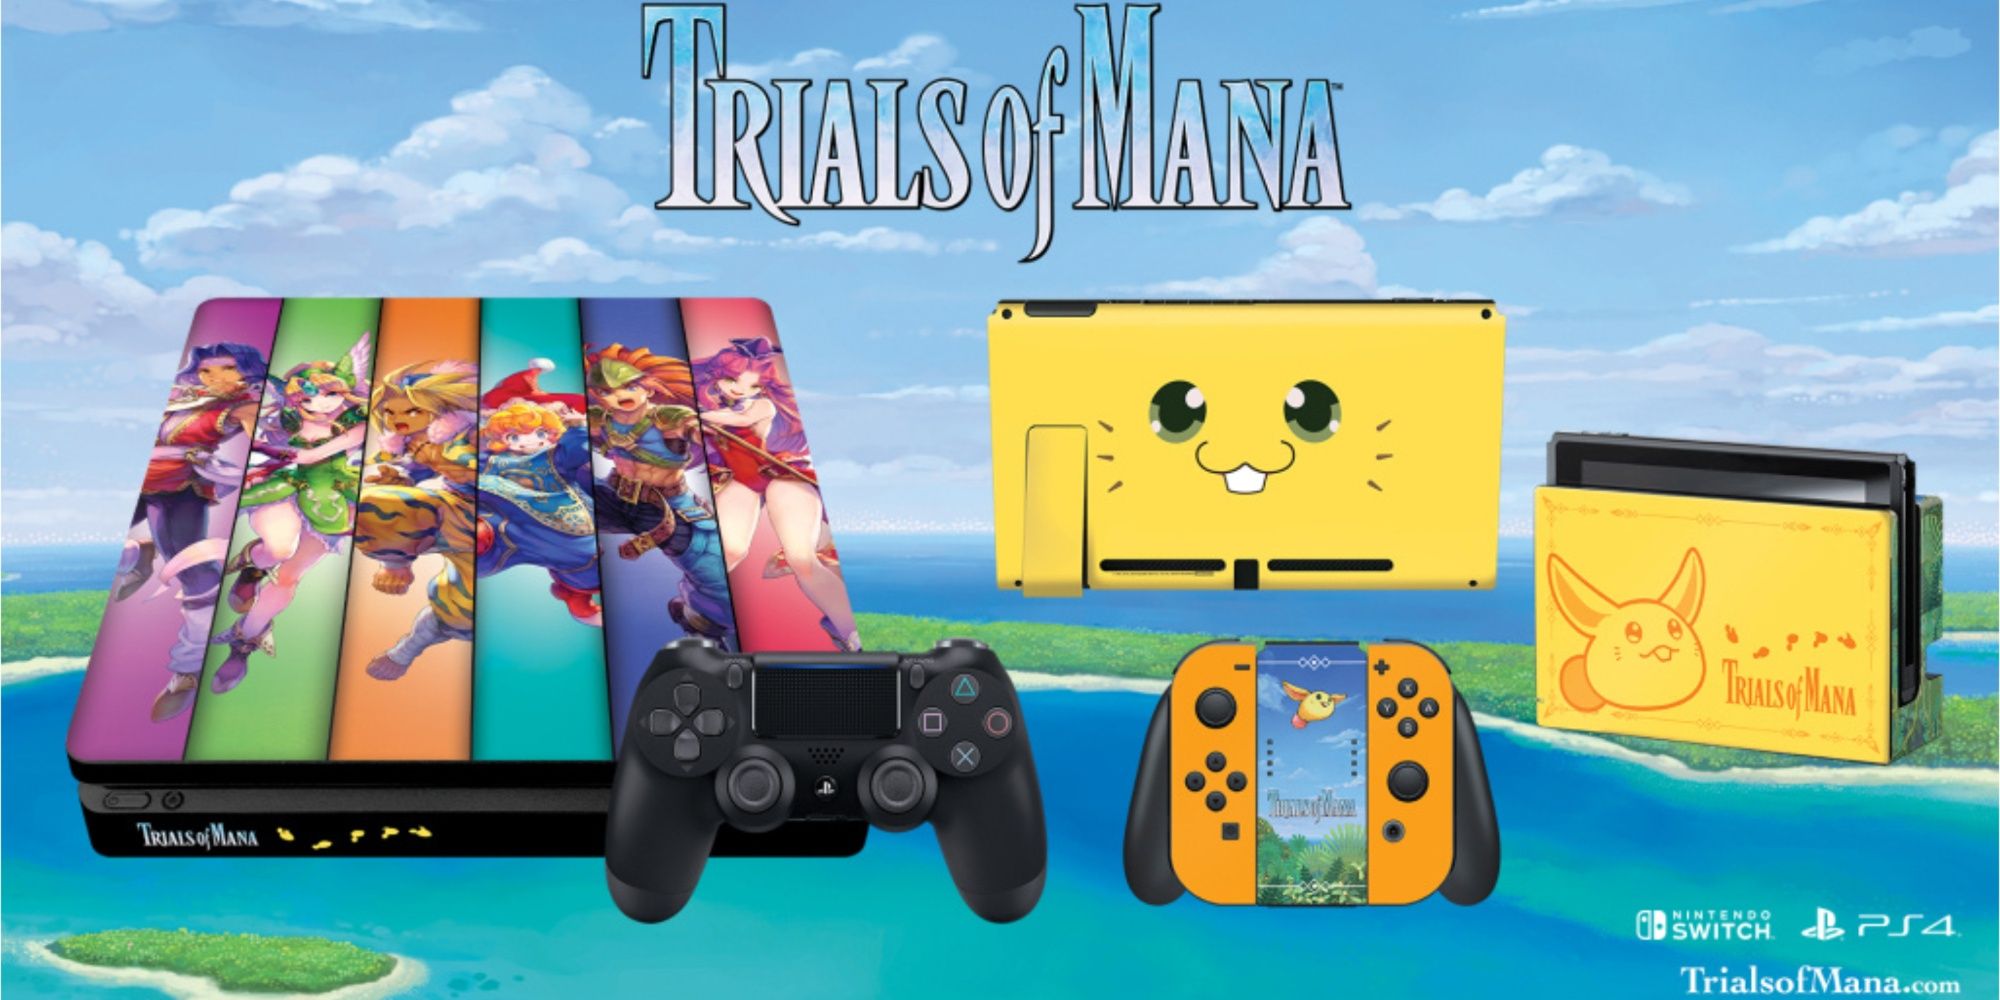 Trials of Mana PS4 and Nintendo Switch special edition consoles